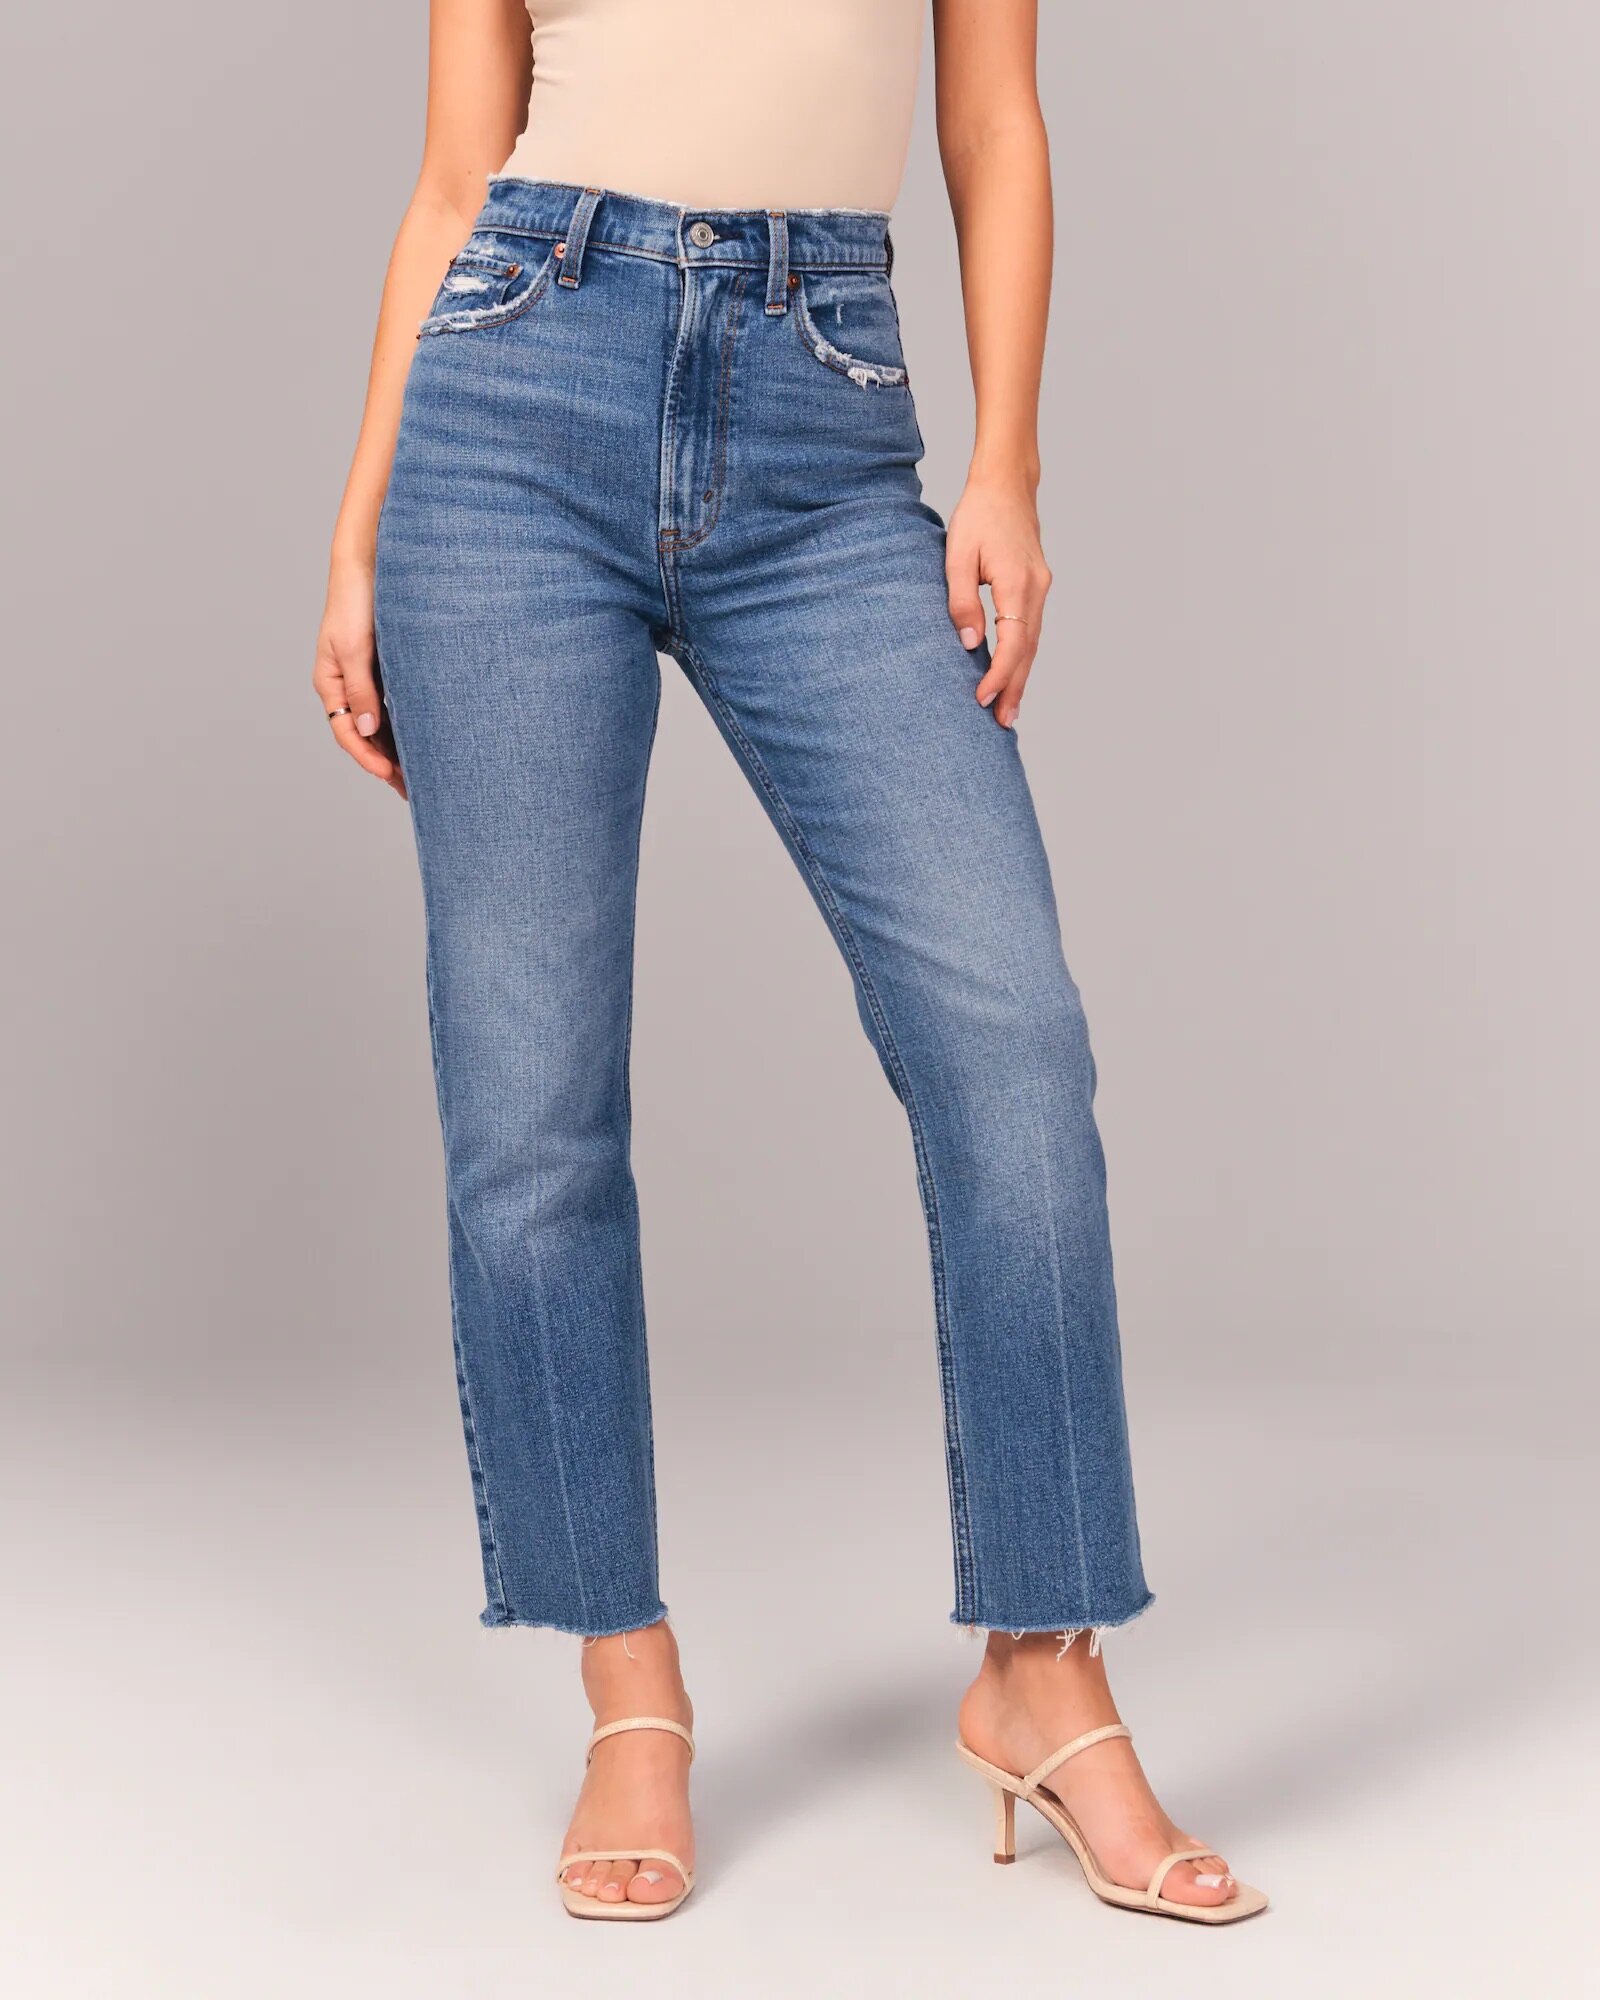 Straight Leg Jeans Are The Greatest Lie The Devil Ever Told — The